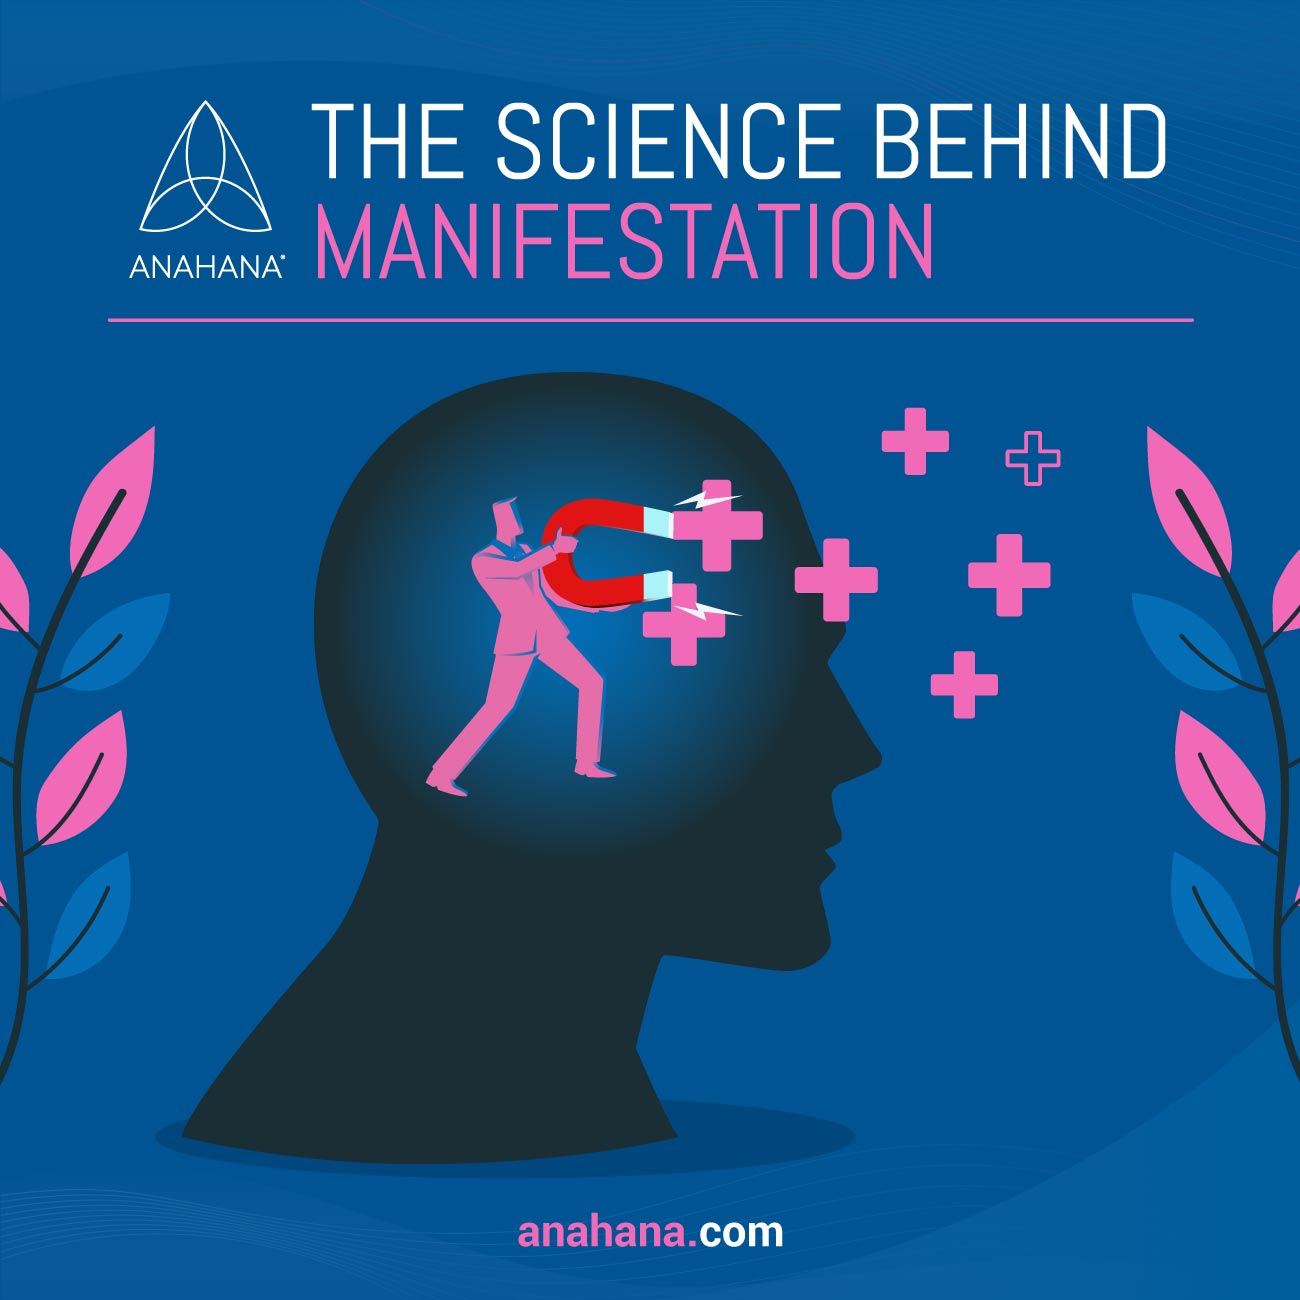 the science behind manfestation